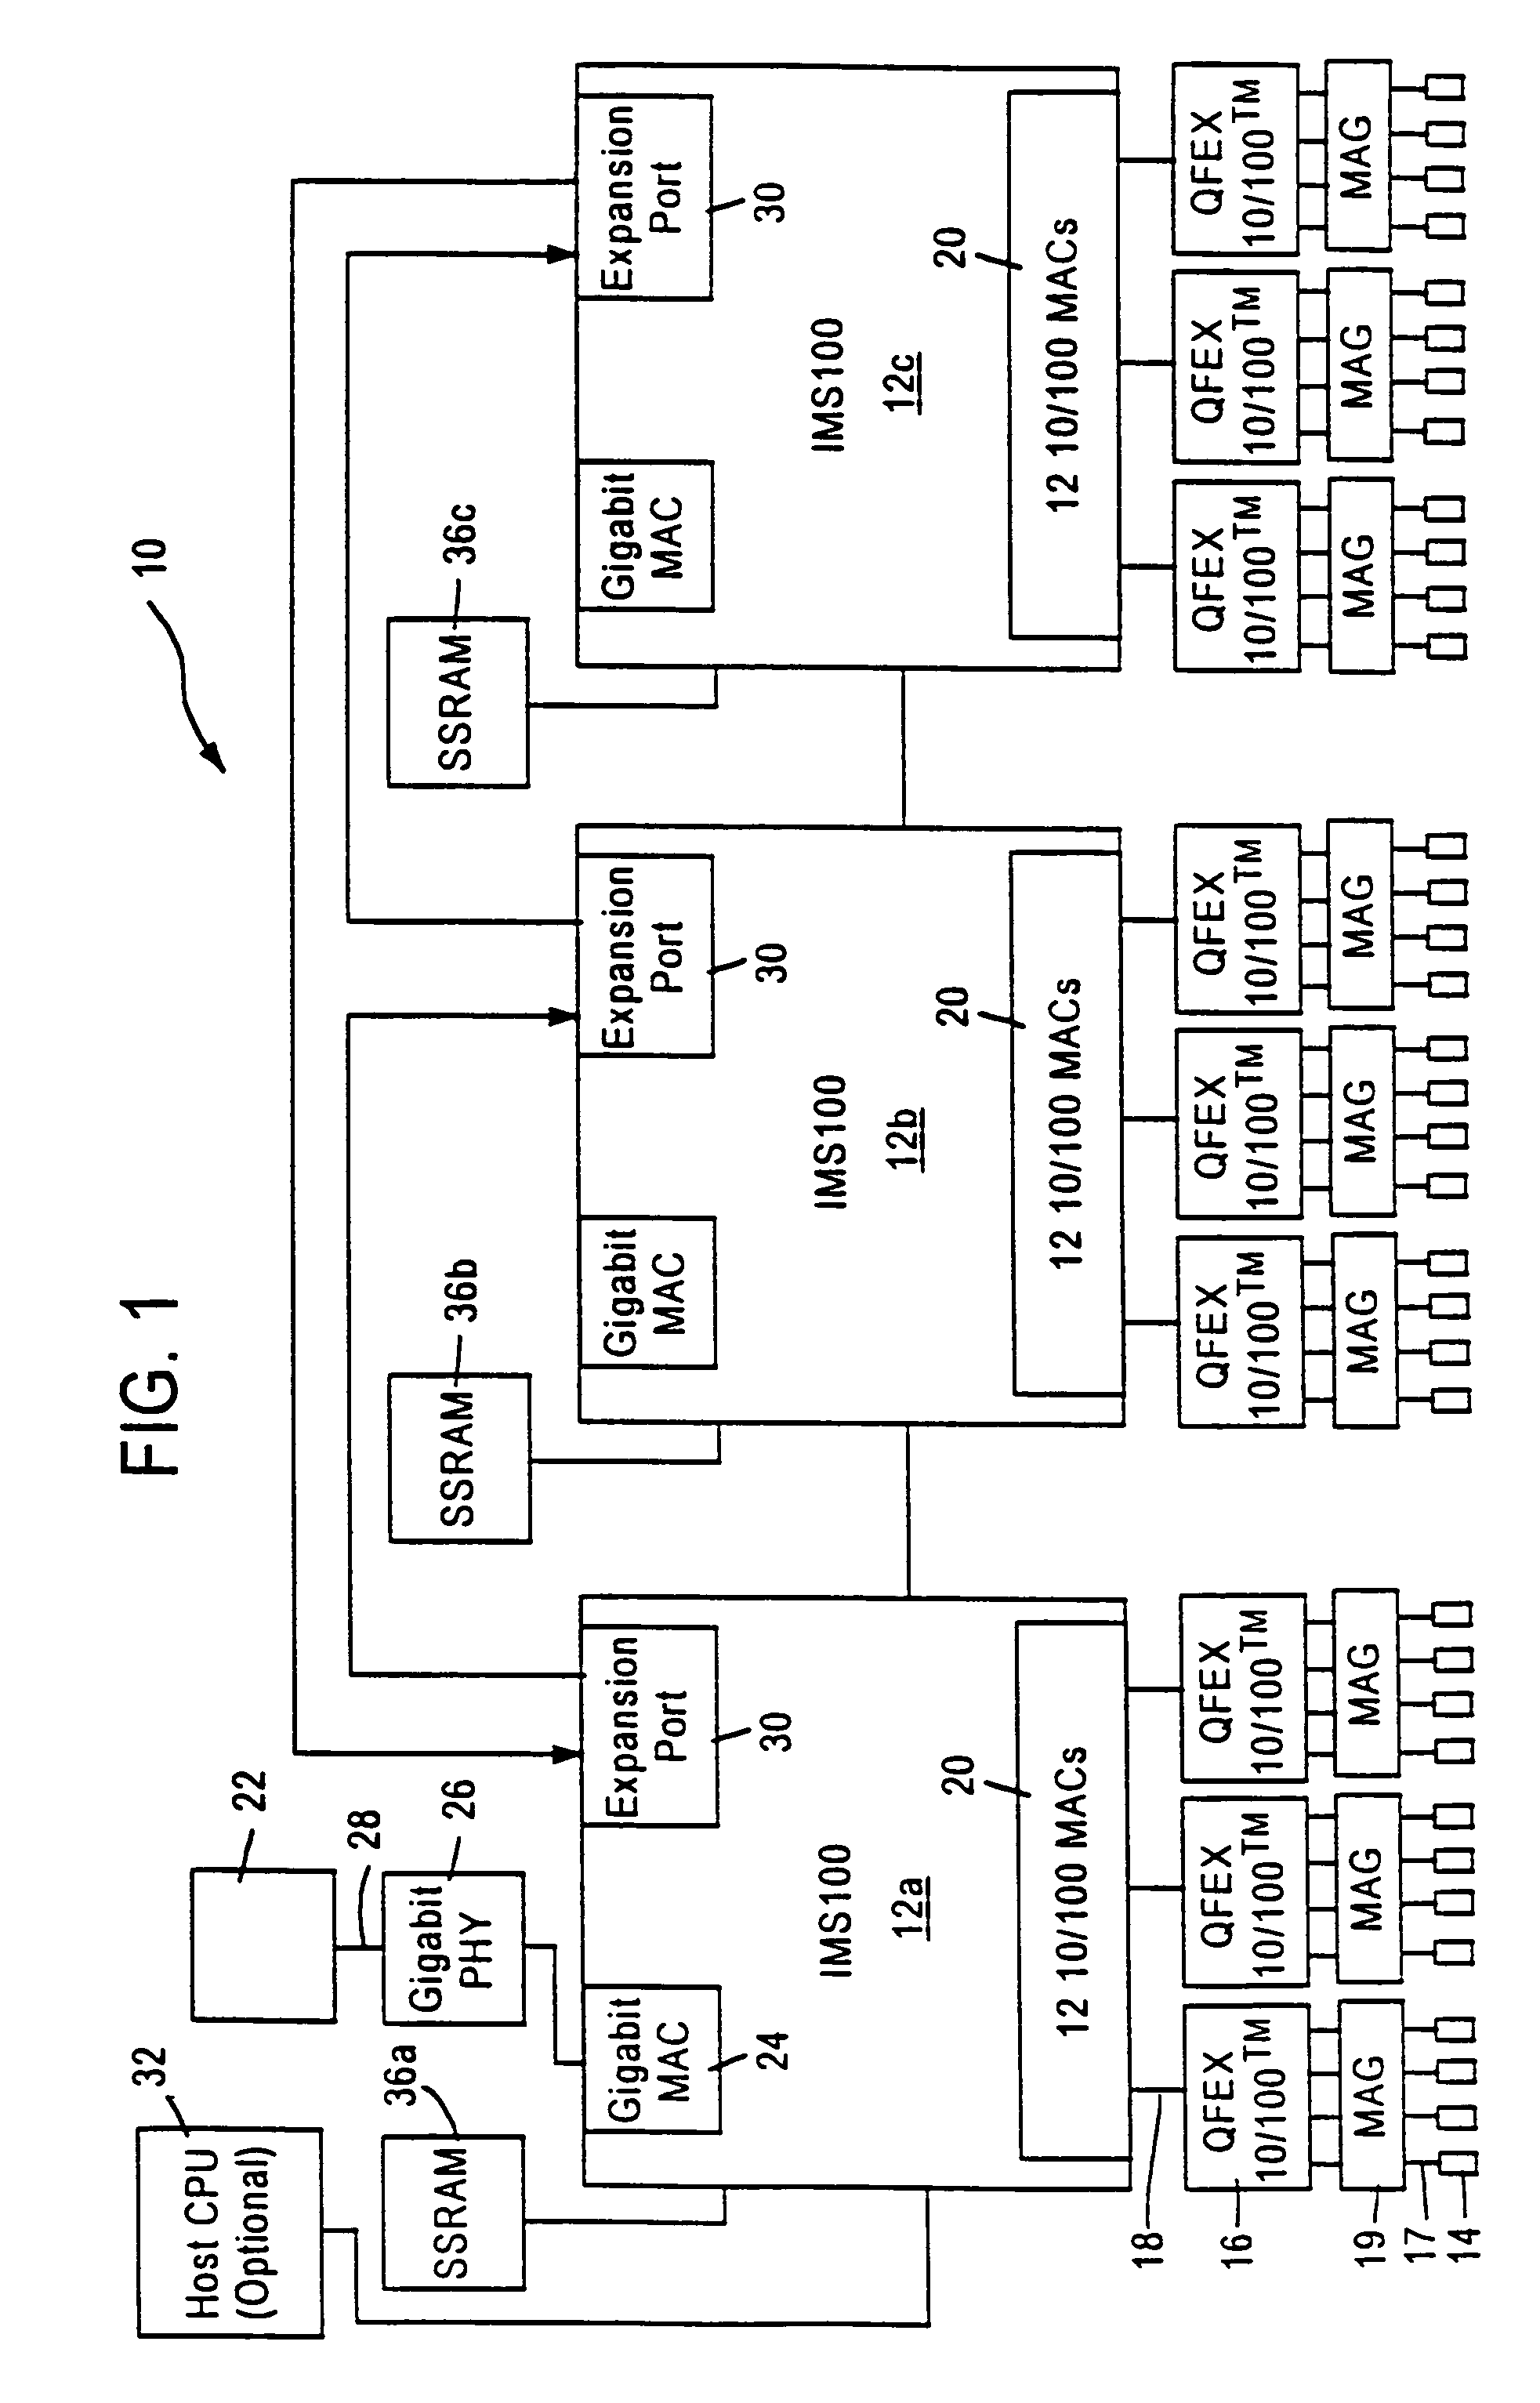 Apparatus and method for programmable memory access slot assignment